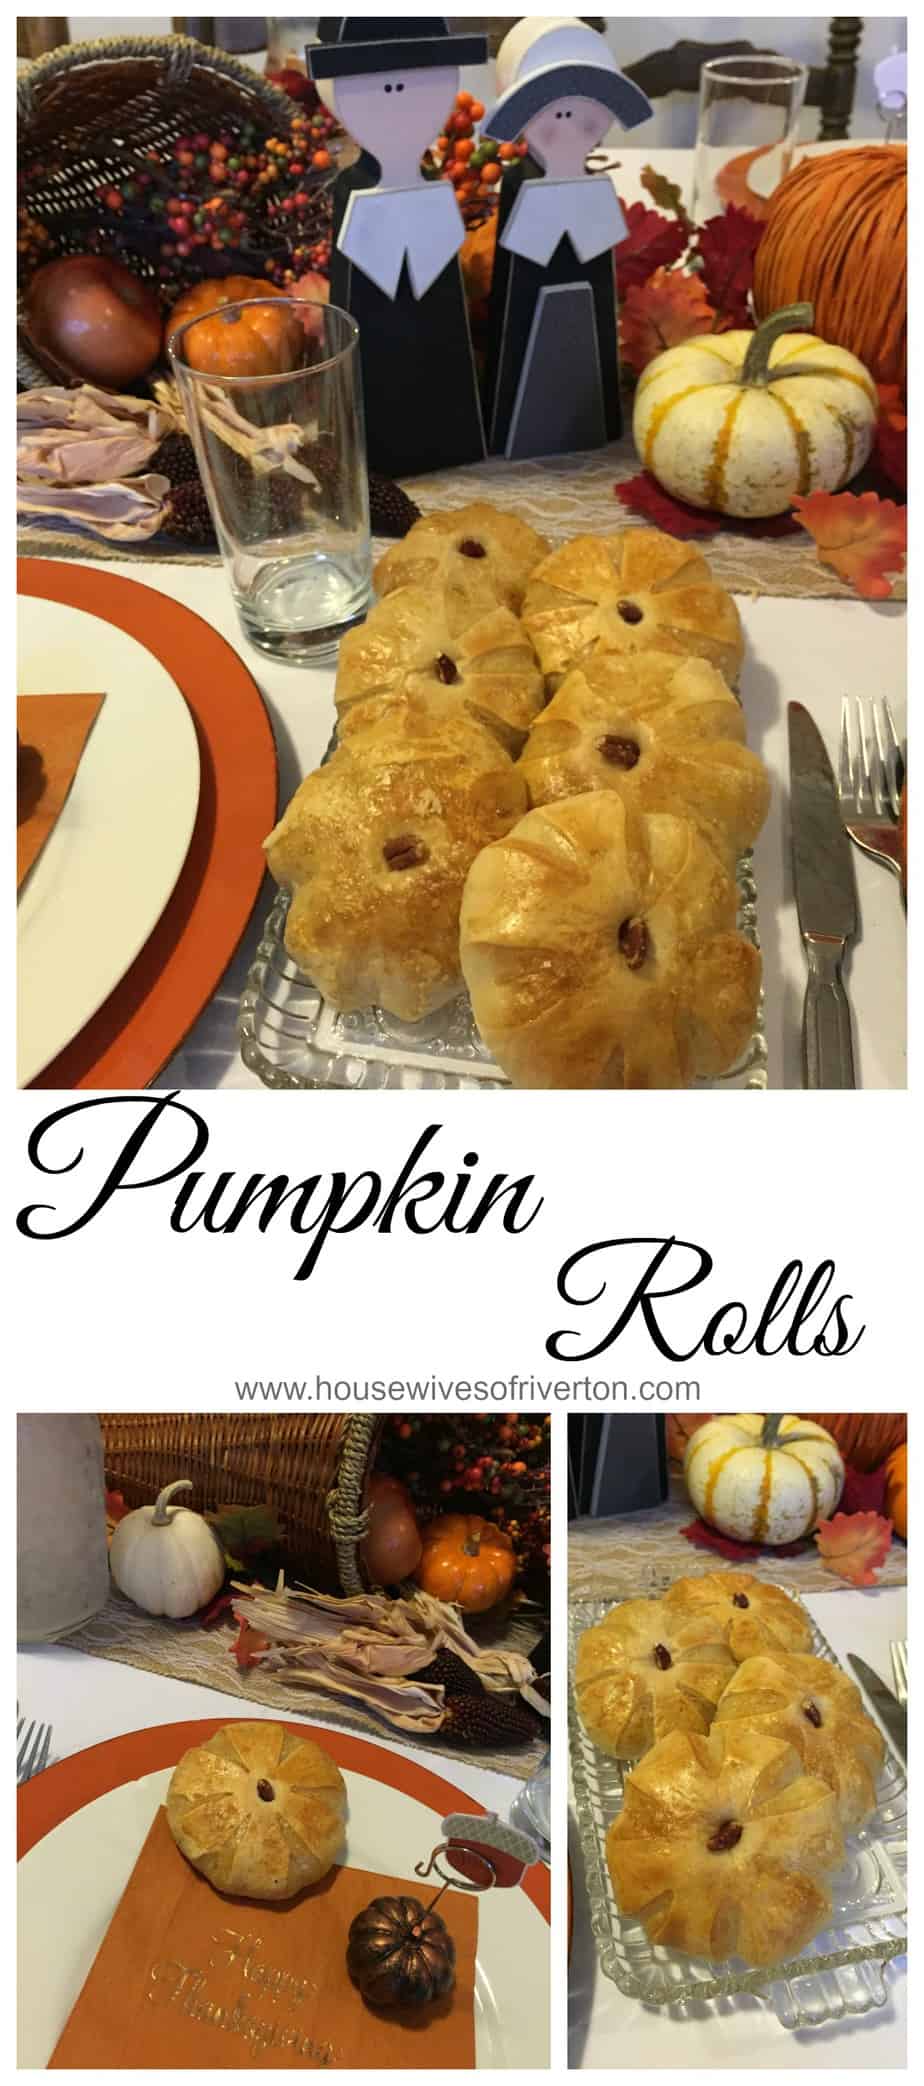 Pumpkin Rolls - These rolls will look great on your Thanksgiving table and are simple to make! | www.housewivesofriverton.com